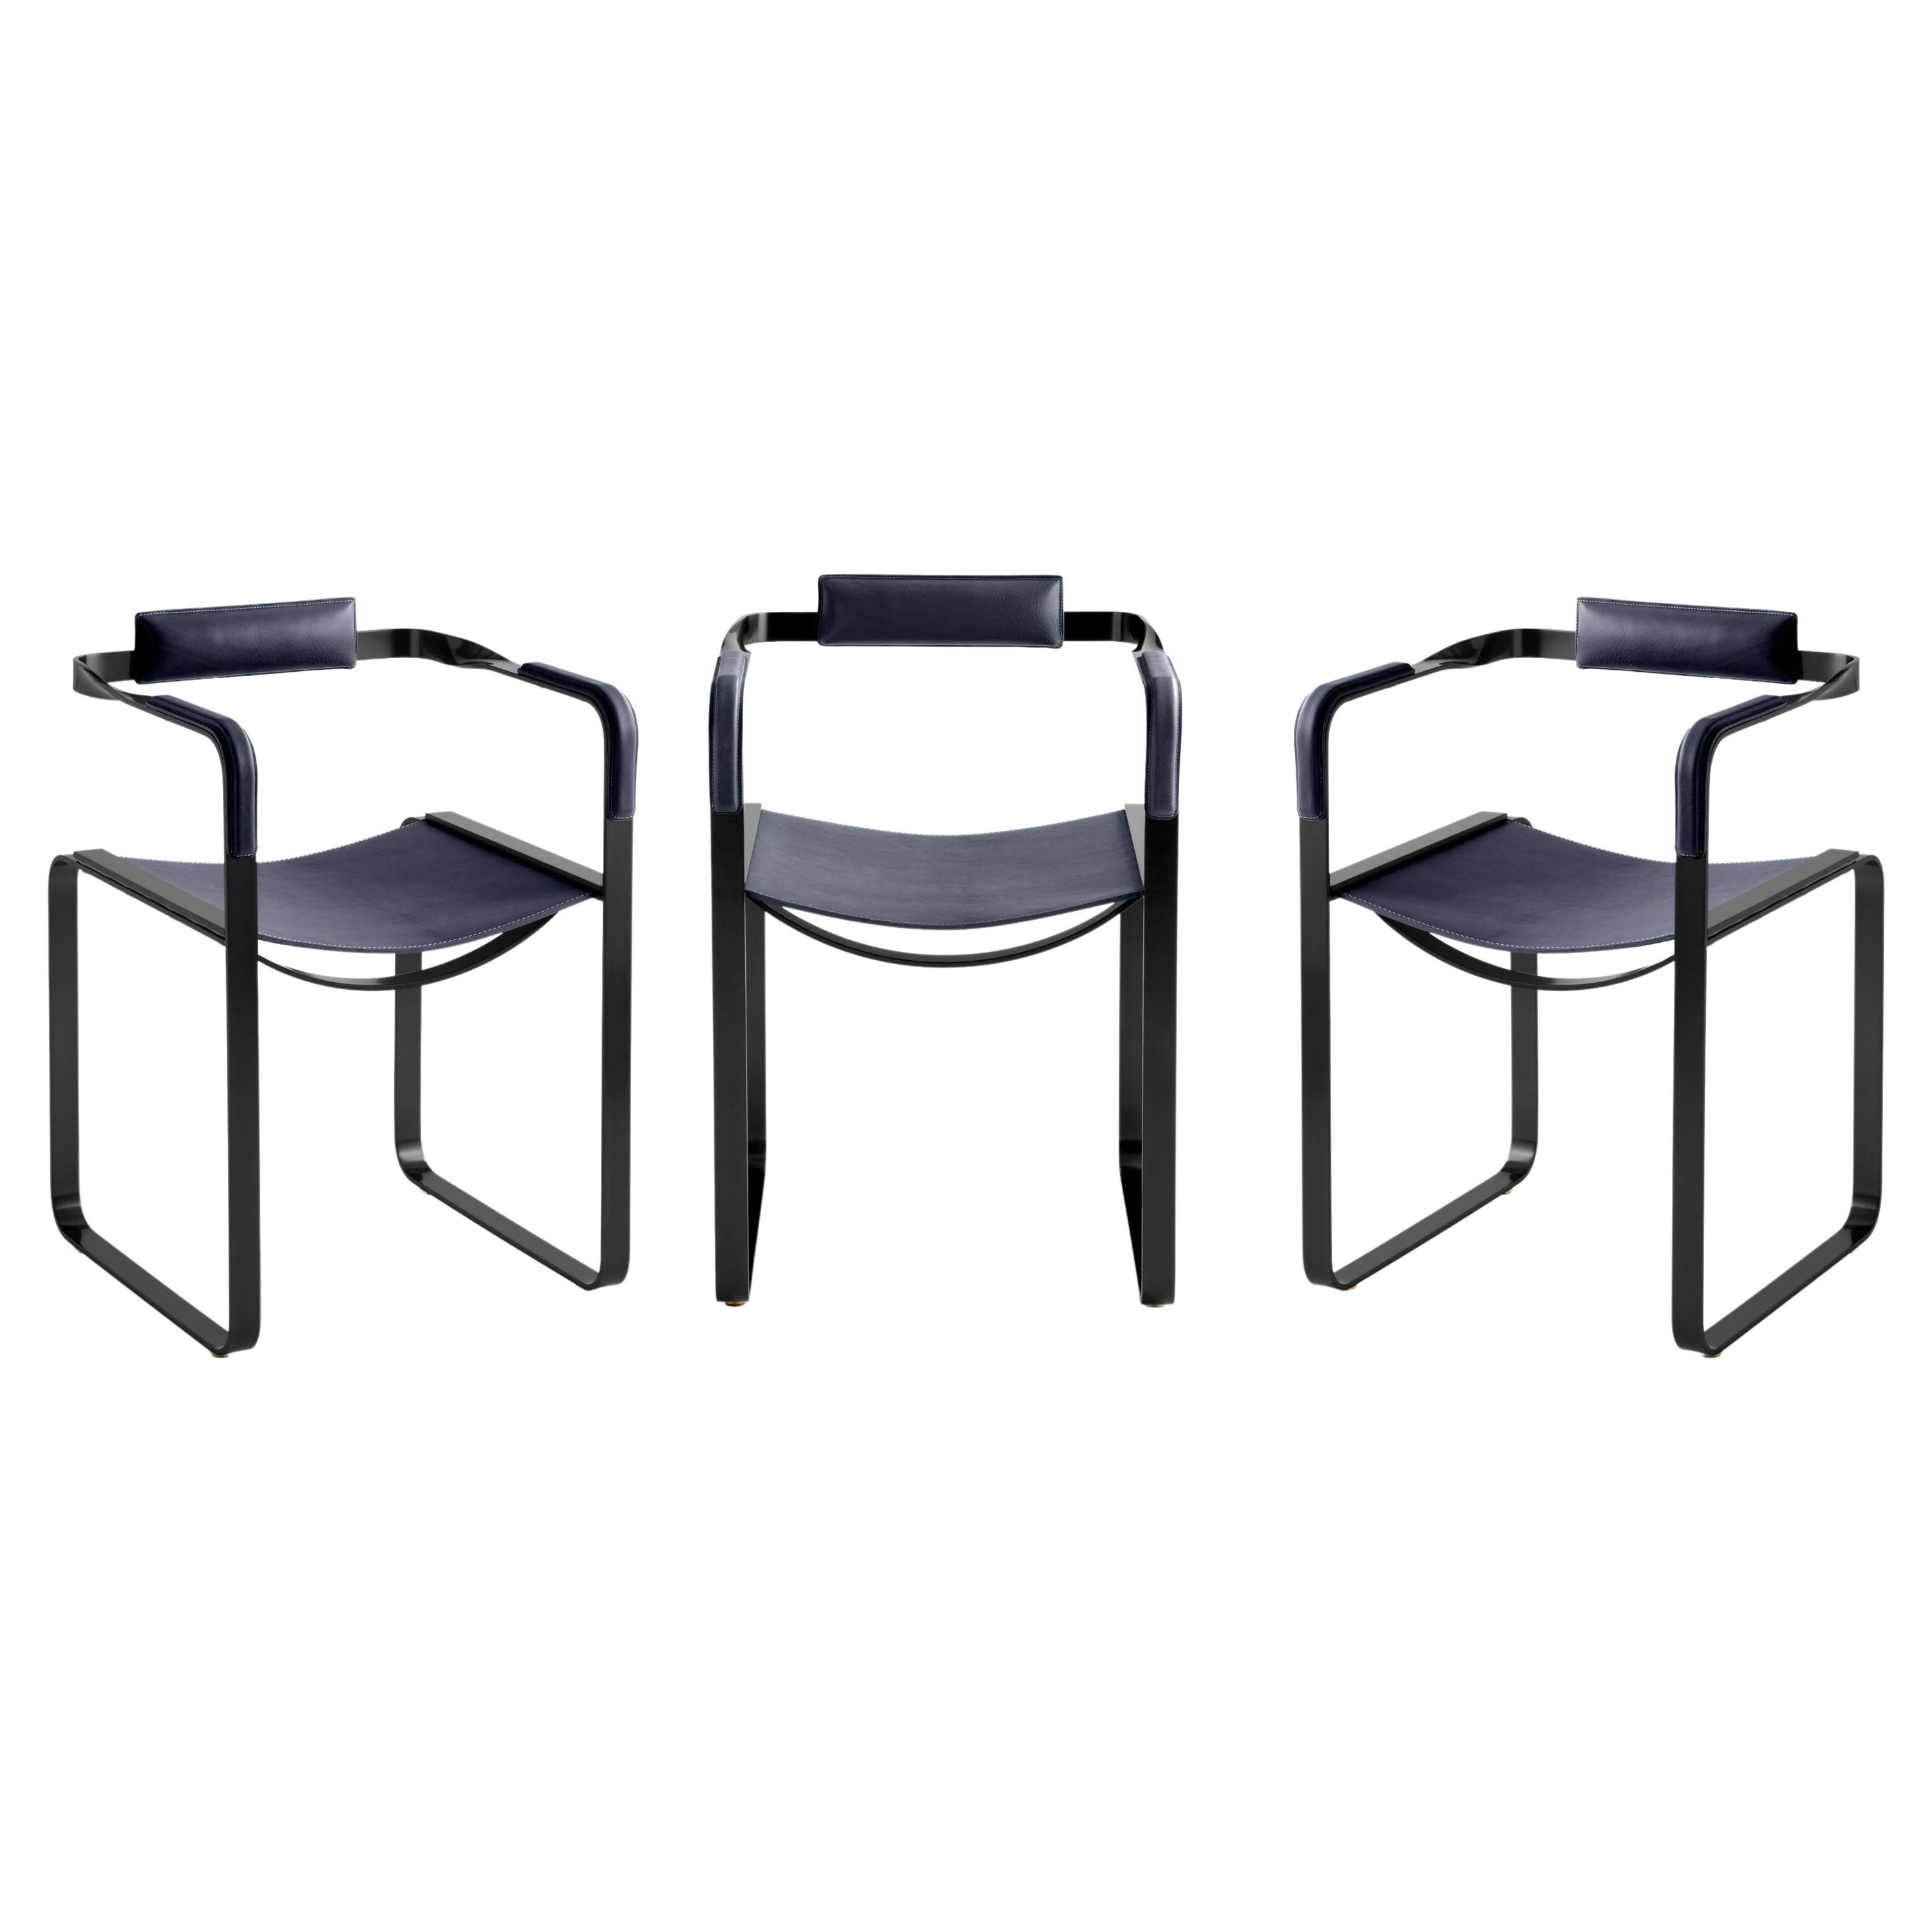 Set of 3 Armchair, Black Smoke Steel & Blue Navy Saddle, Contemporary Style For Sale